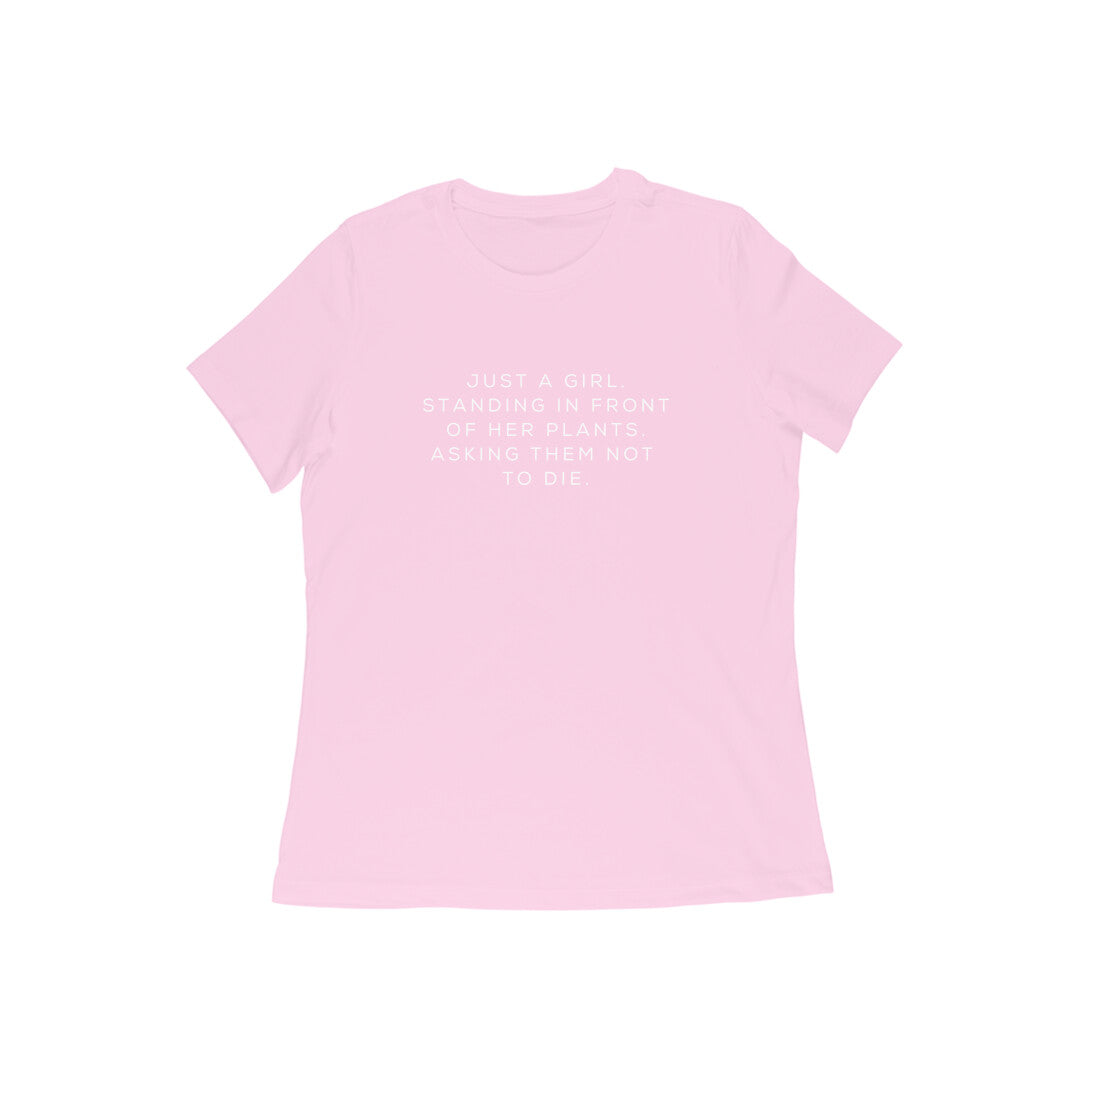 Just a girl Tshirts for Women